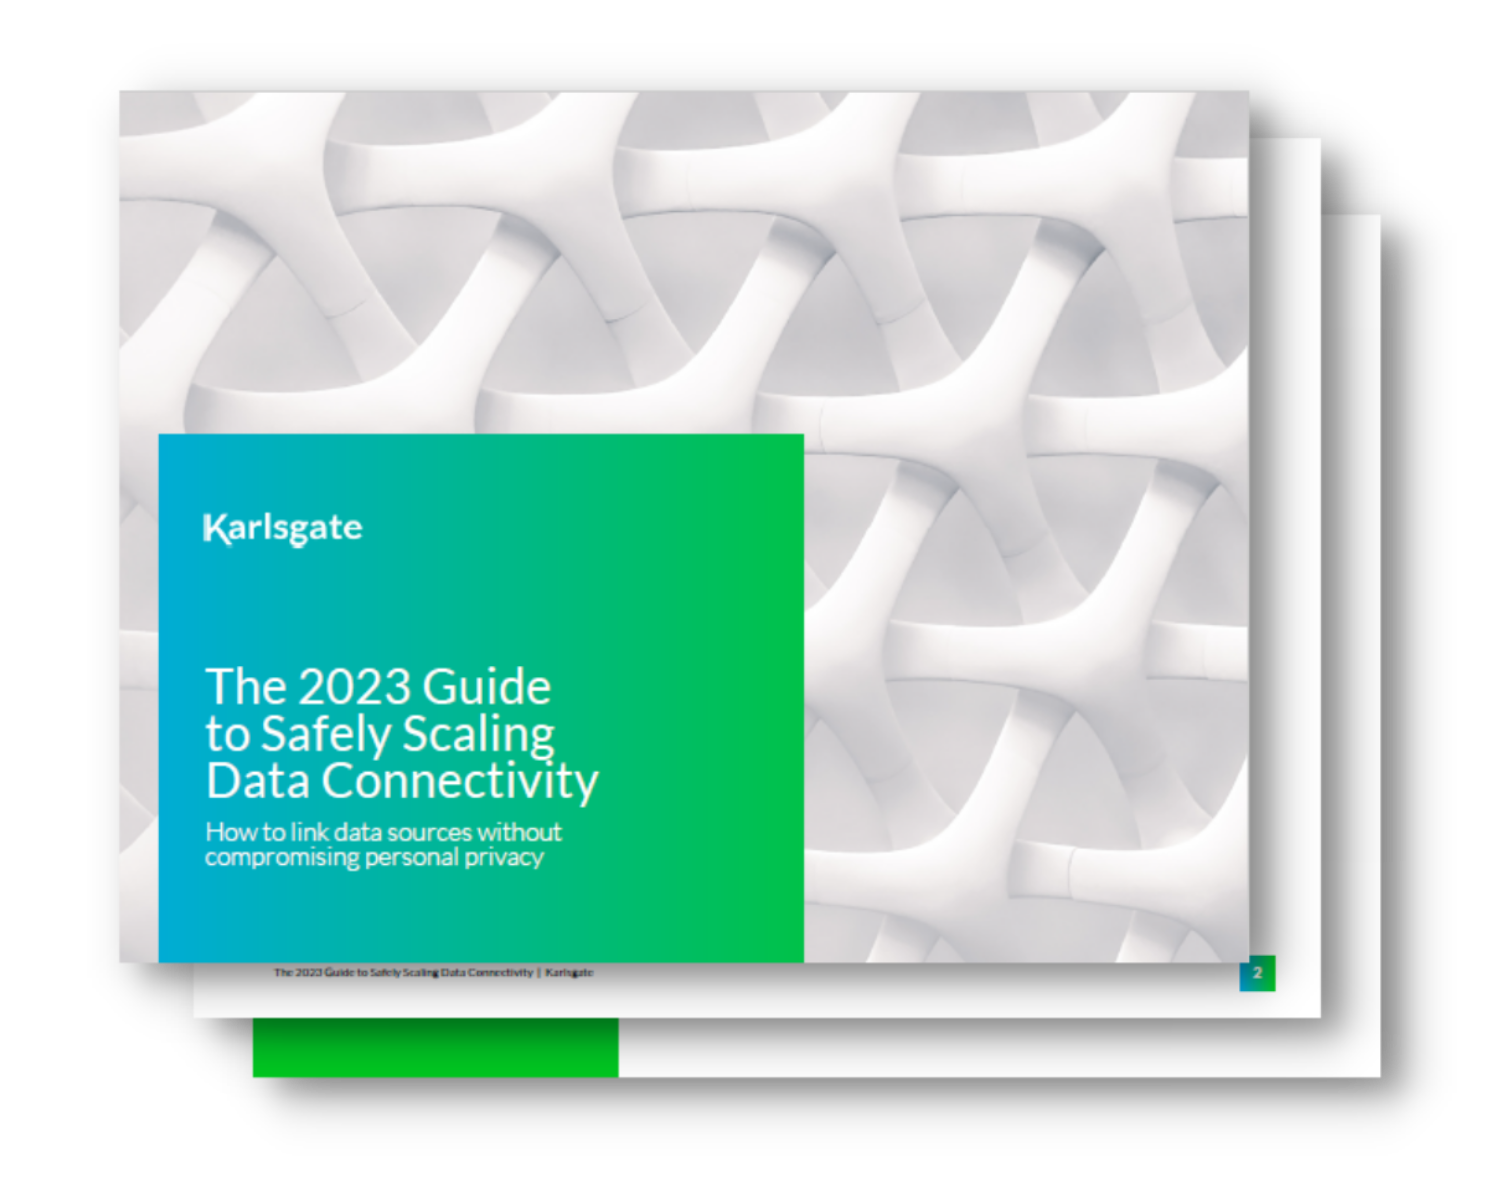 The 2023 Guide to Safely Scaling Data Connectivity